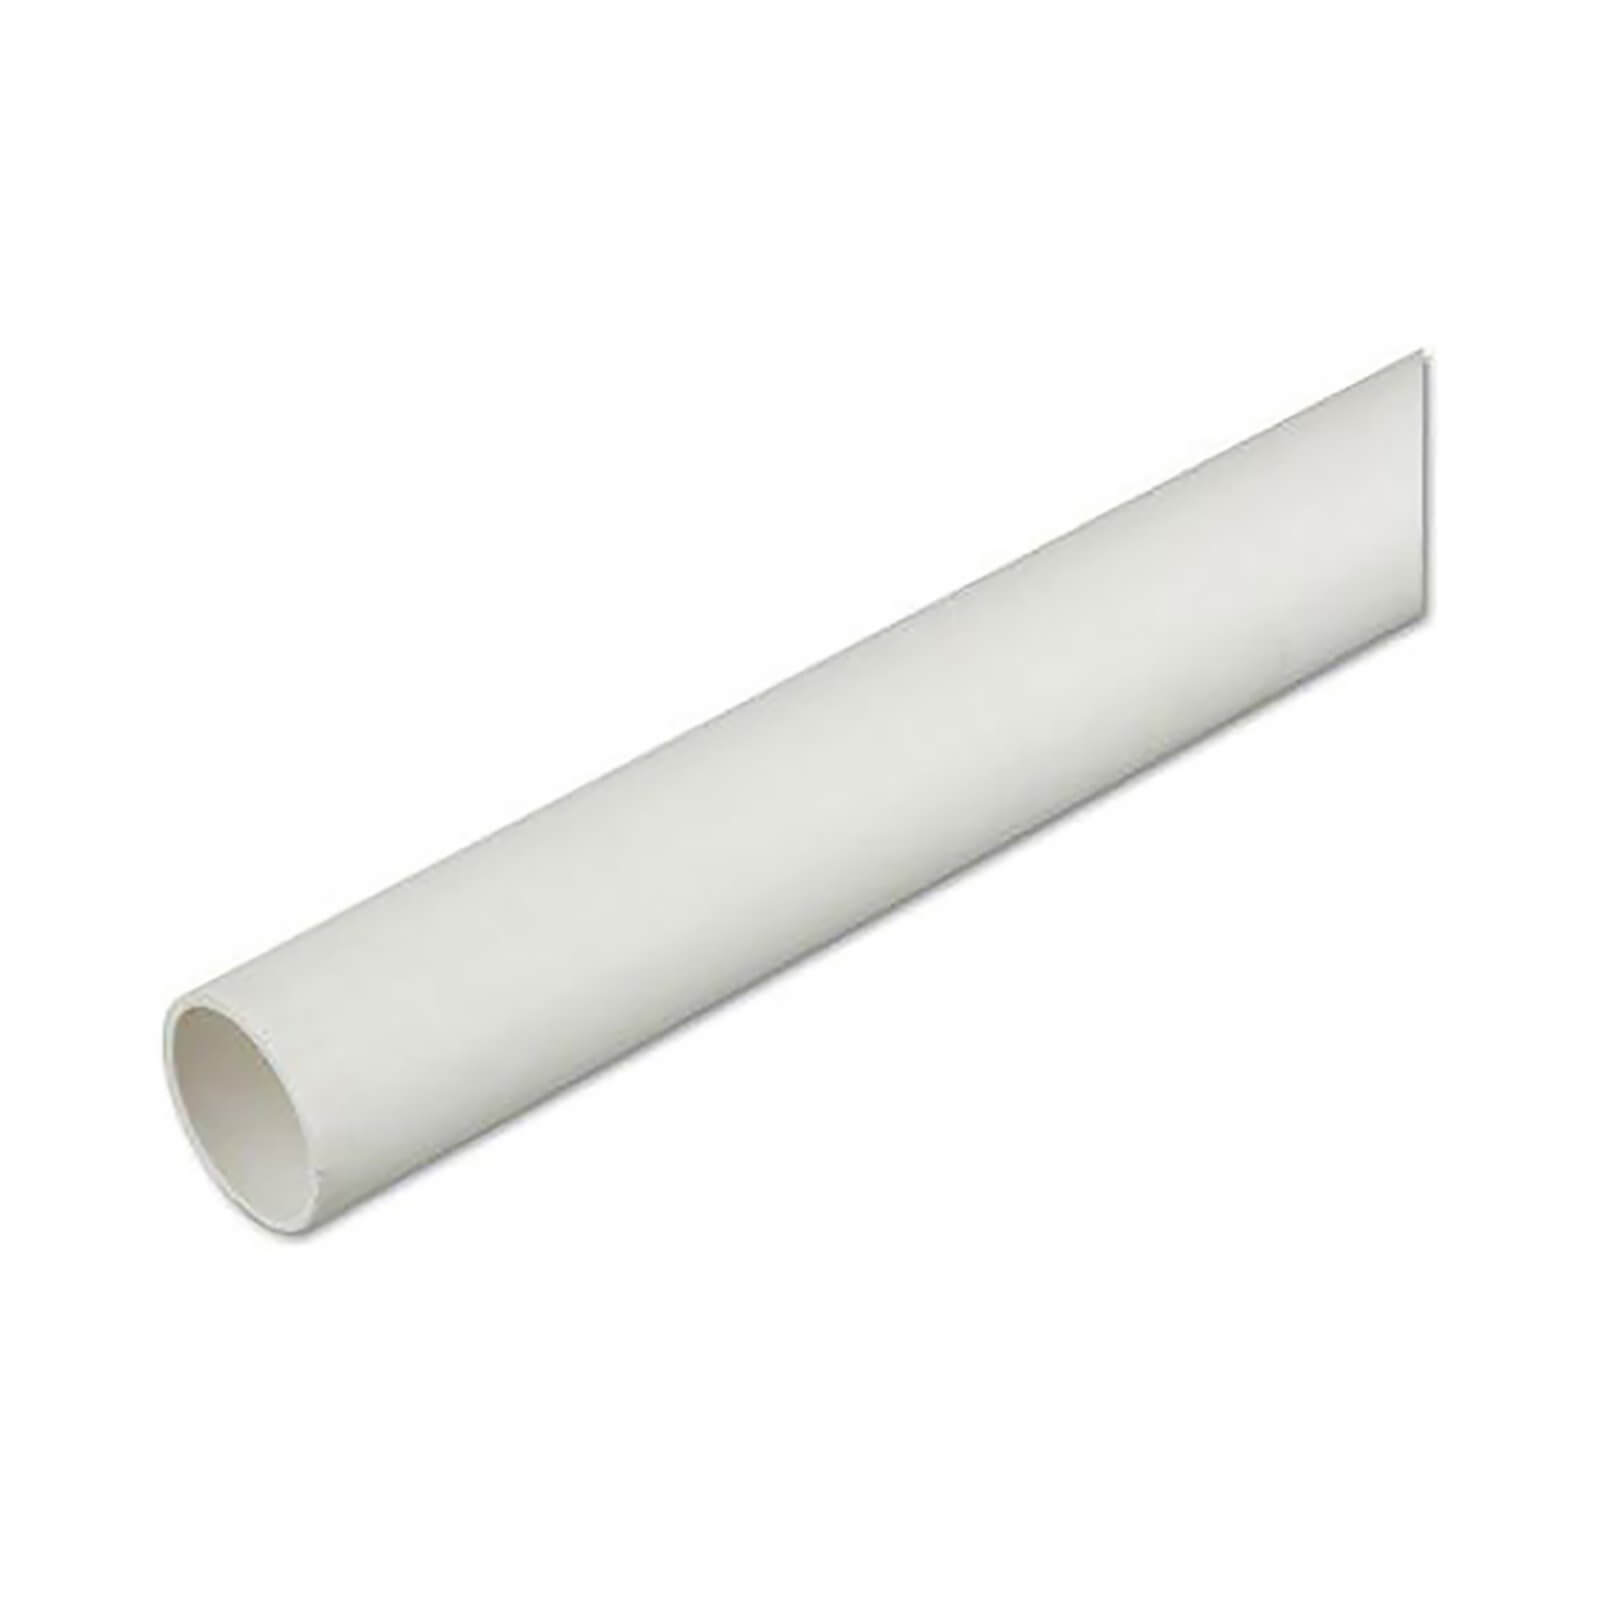 Photo of Universal Waste Pipe - 40mm X 2m